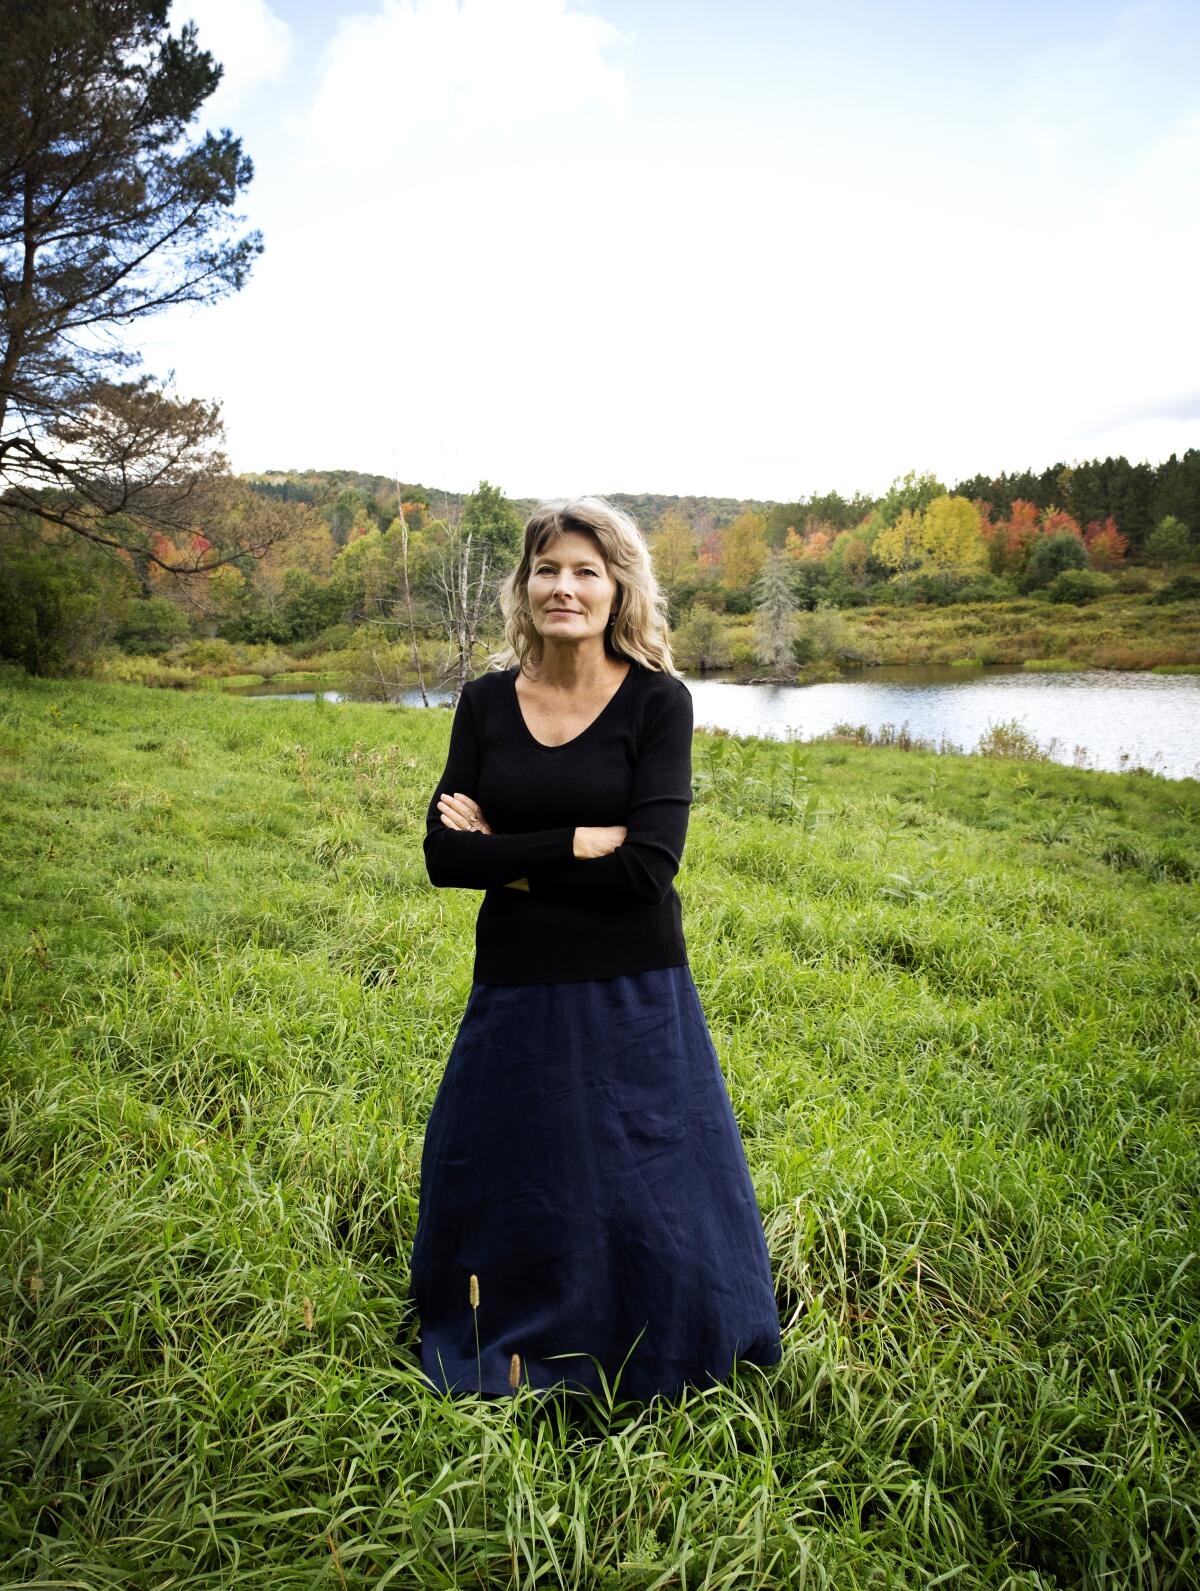 A woman in a dark-colored shirt and skirt stands in a field with water in the background.